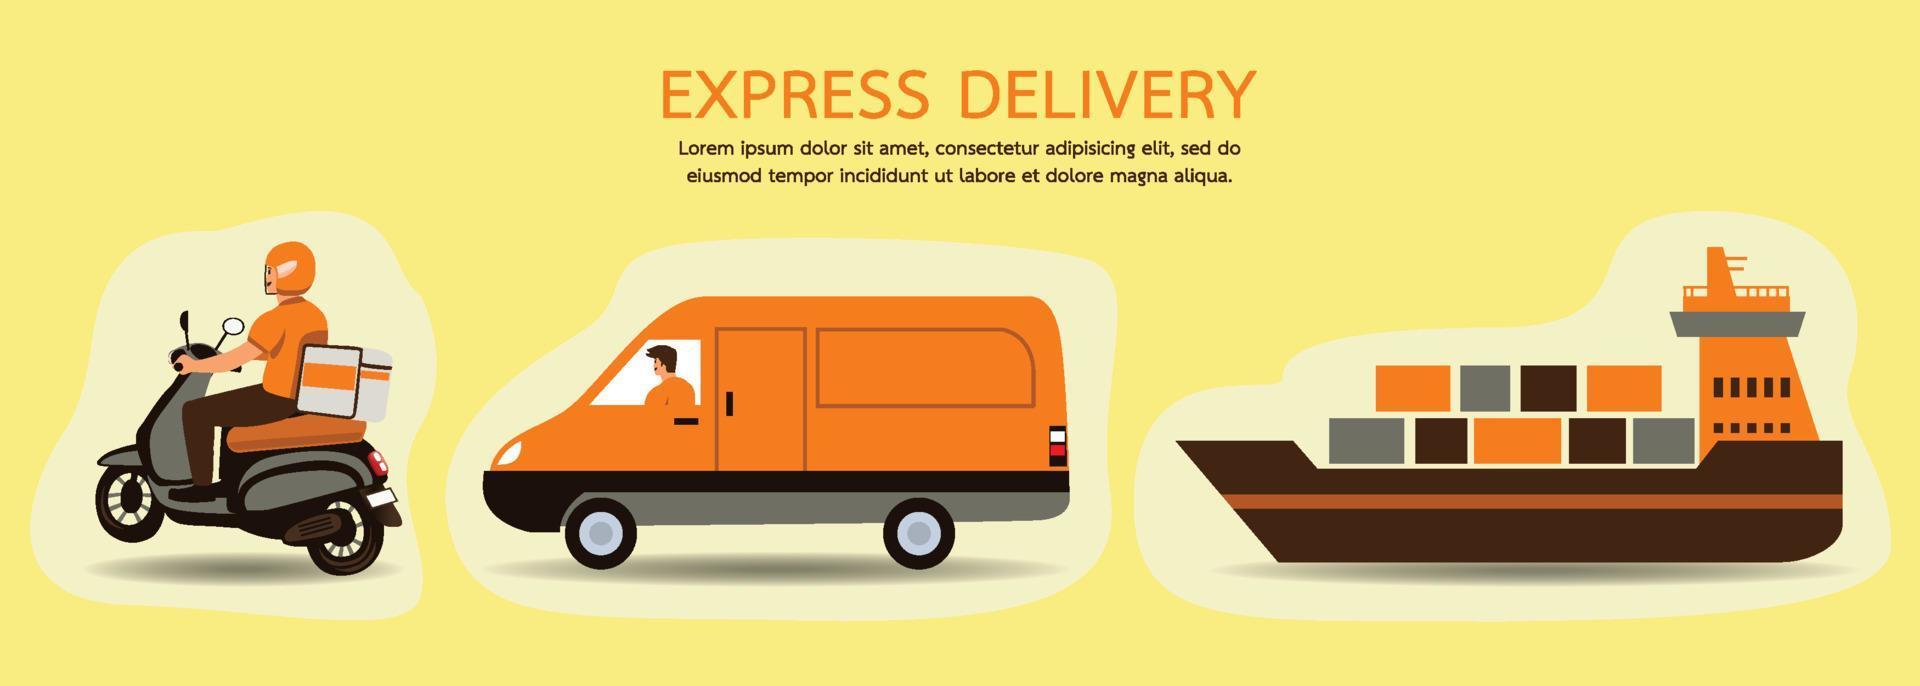 Illustration Vector Land or ground shipping. Carrier delivery service has motorcycle, van, and Cargo ship. Yellow or Orange tones. Design for banner, website, decorations, app, advertising, parcel.